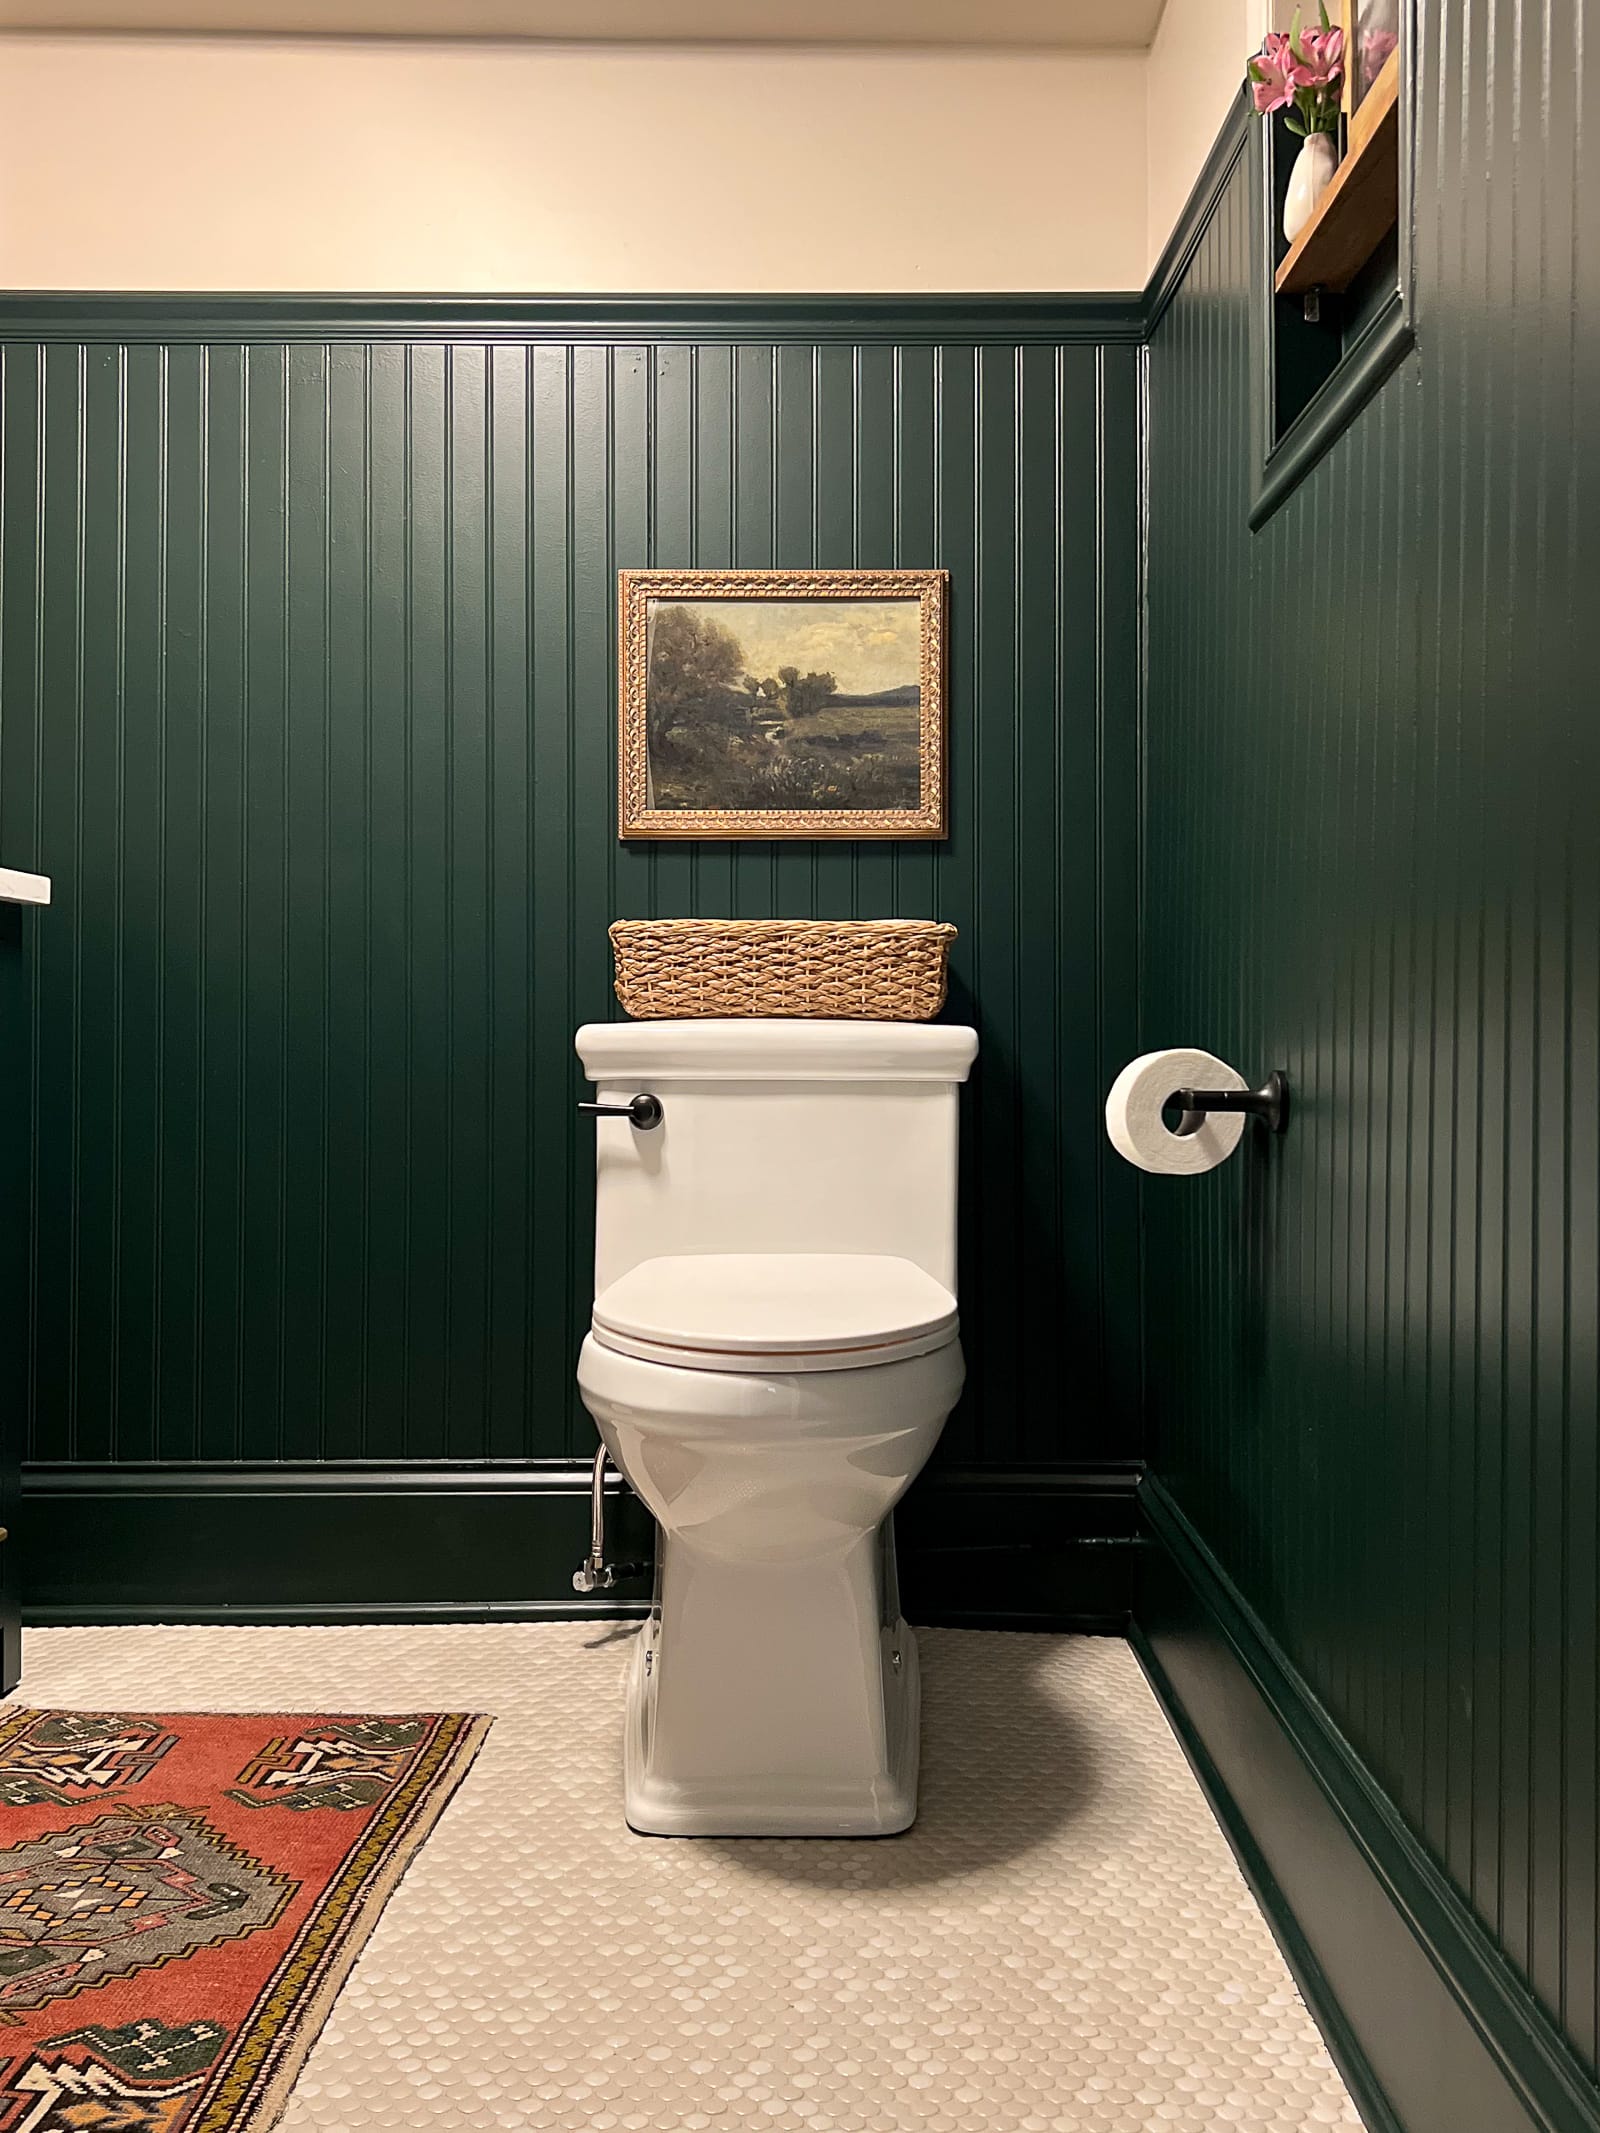 The reveal of our dark green bathroom in the basement